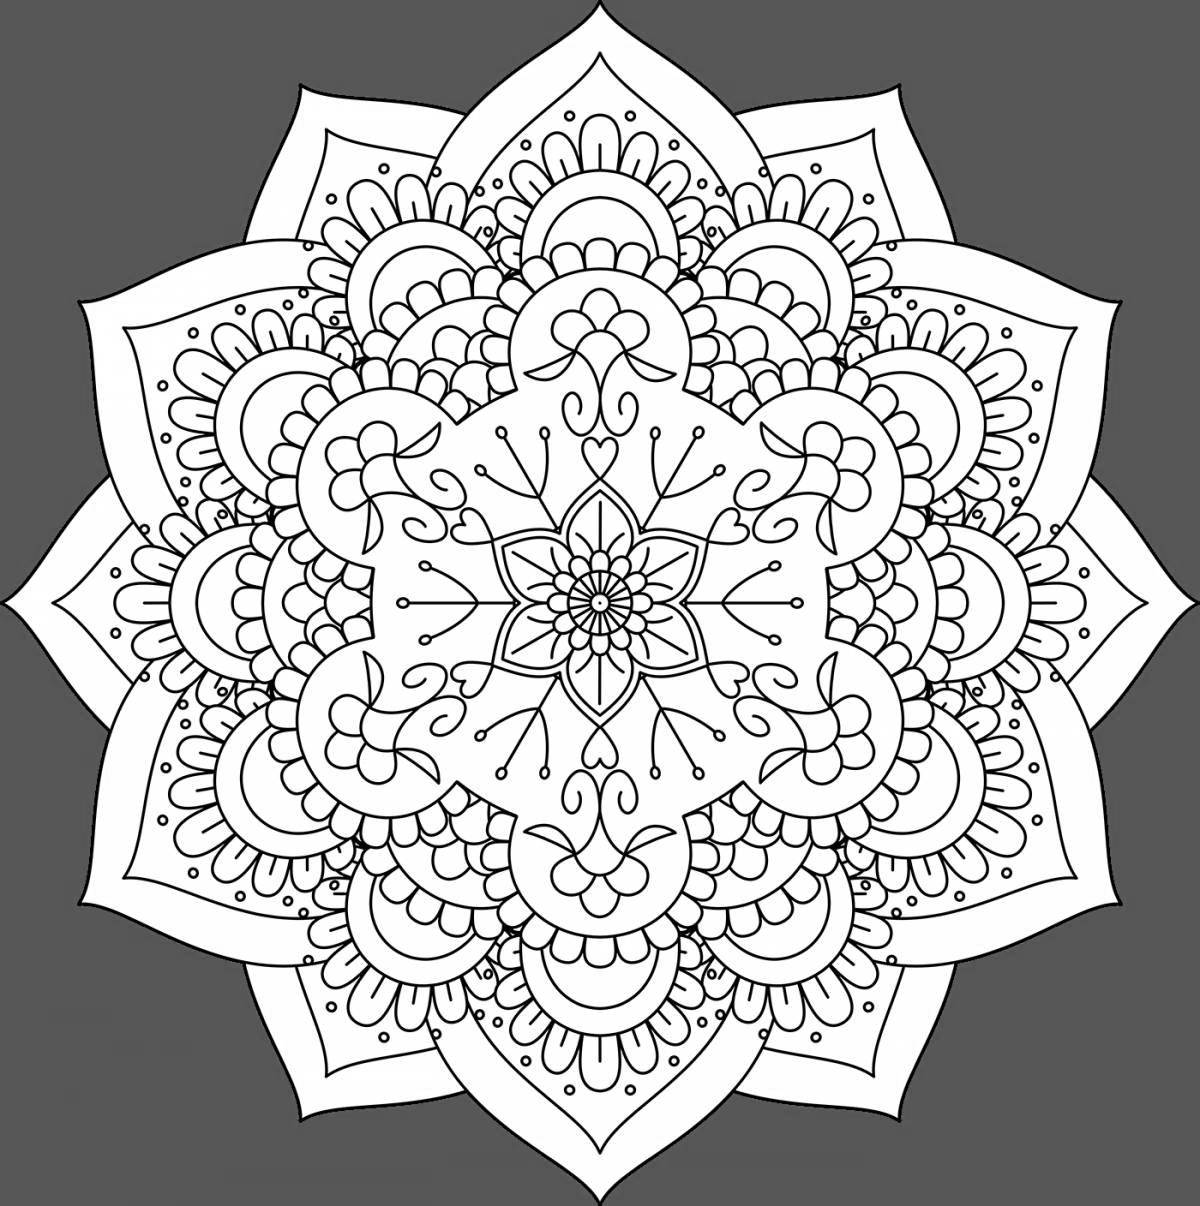 Exquisite coloring mandala for love